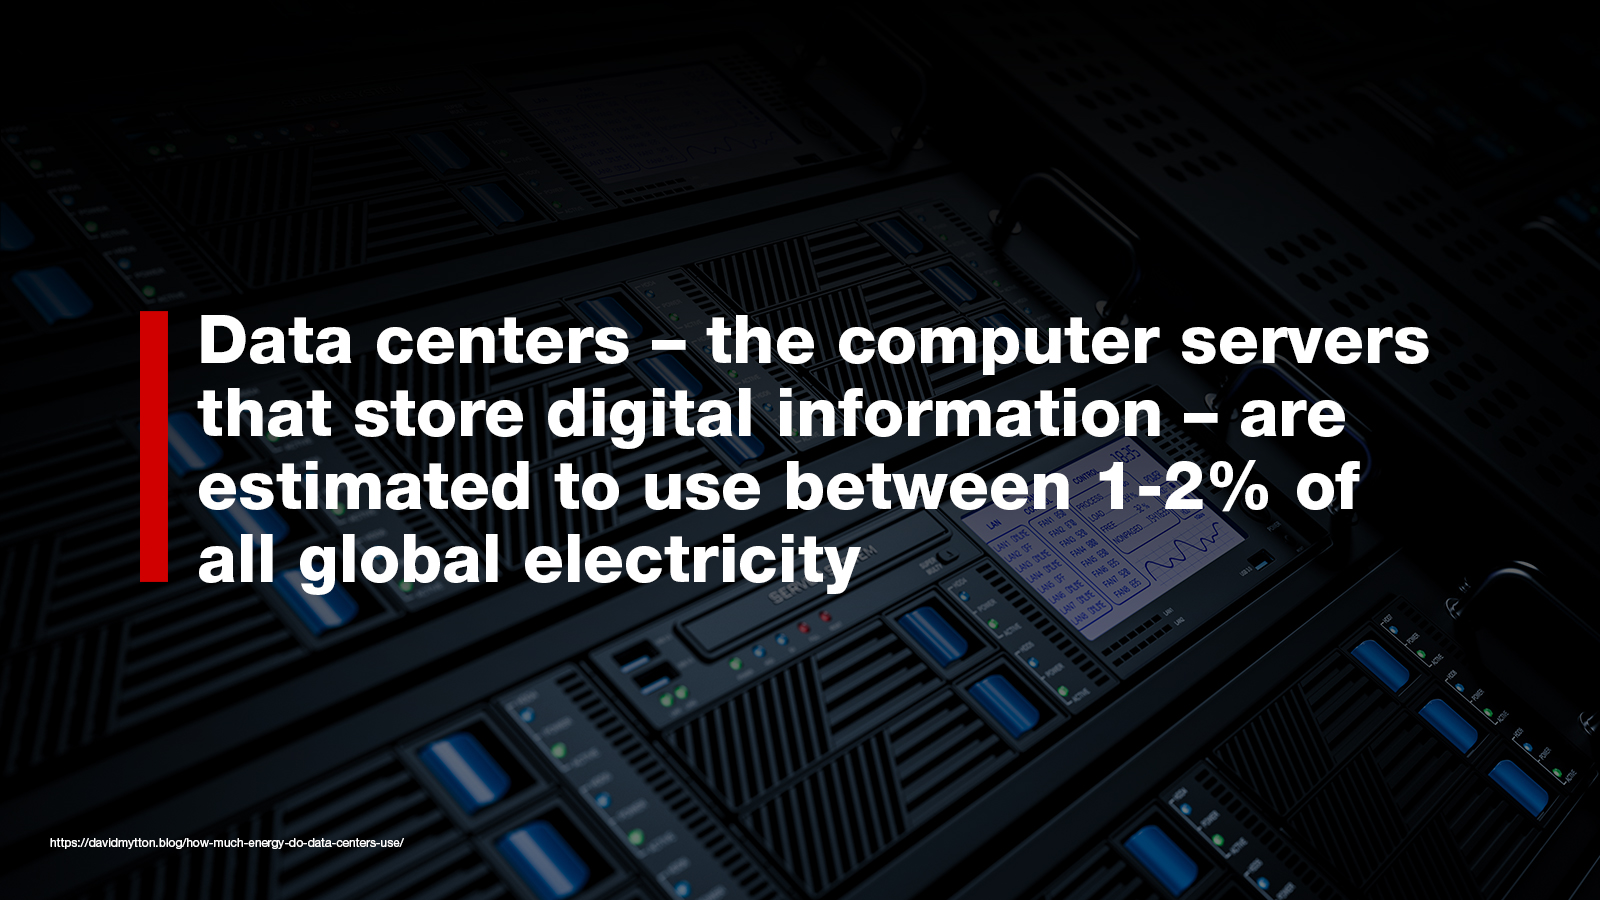 Data centers are estimated to use 1-2% of all global electricity